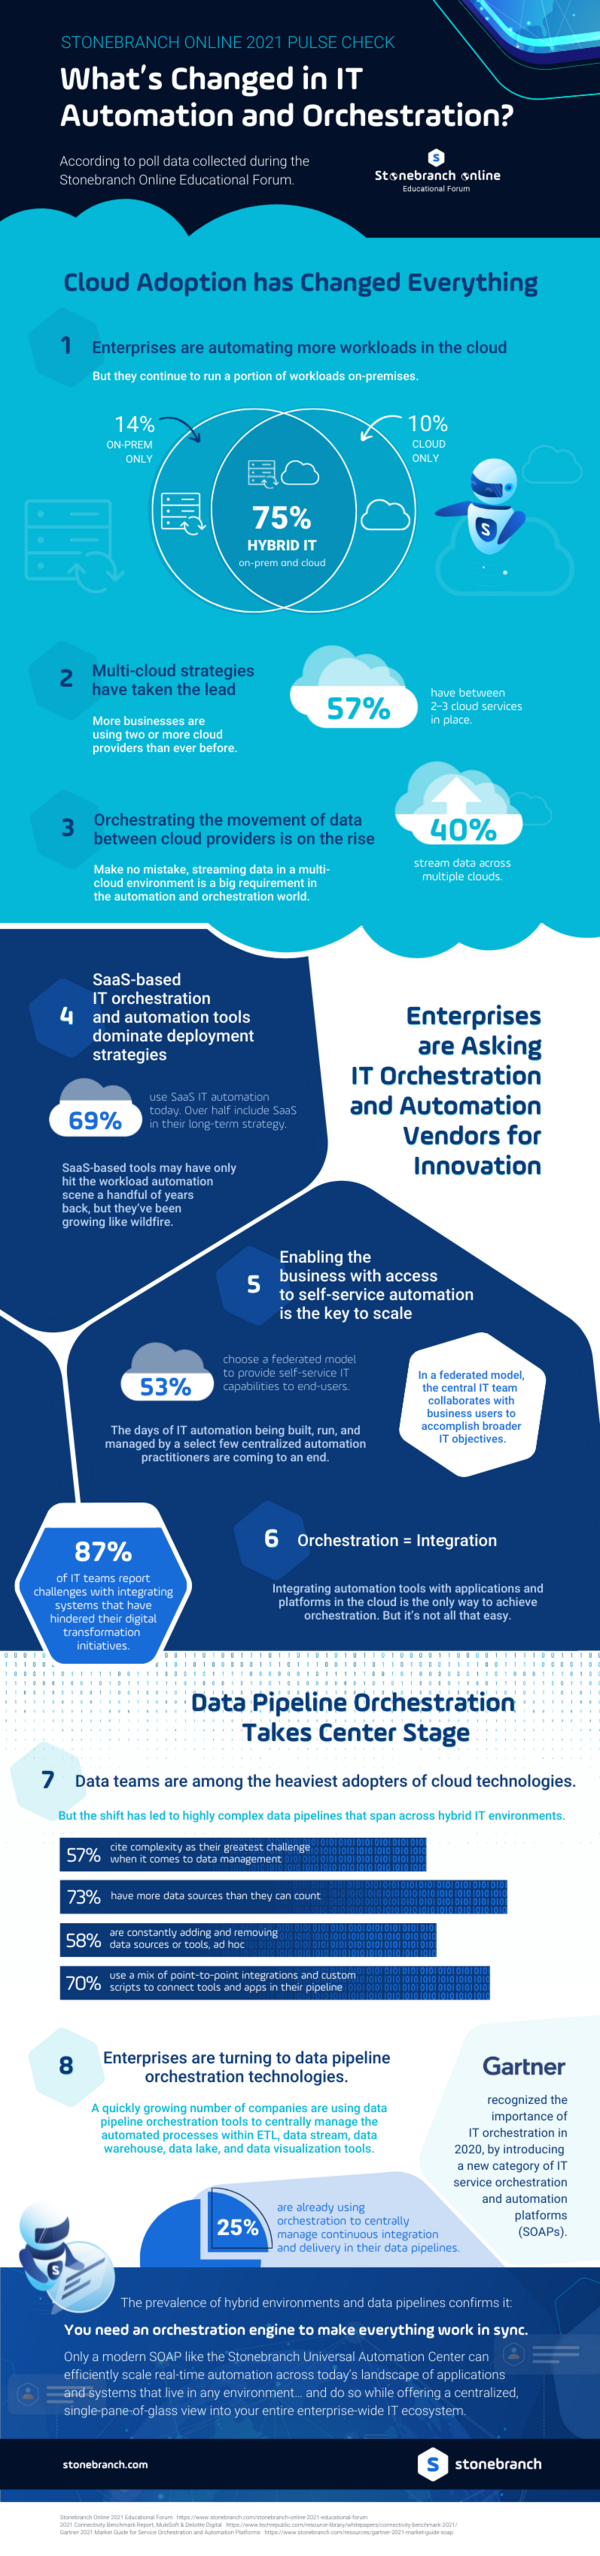 [Infographic] Stonebranch Online 2021 Pulse Check: What's Changed in IT Automation and Orchestration?